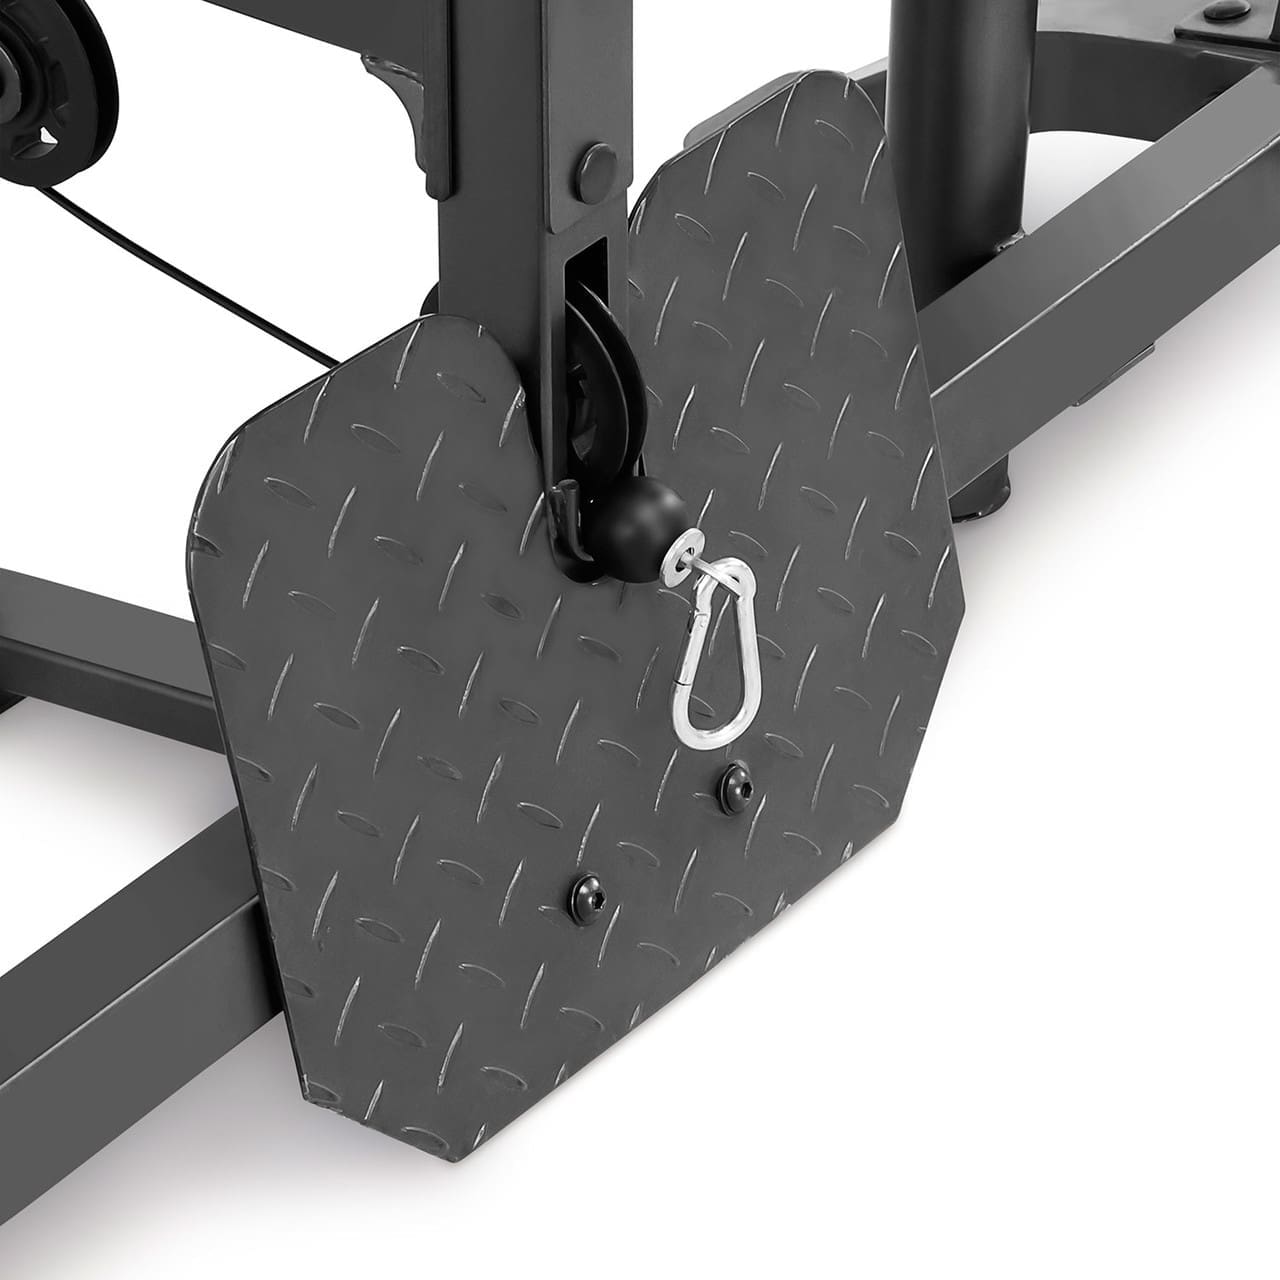 Marcy MD-9010G Home Gym Smith Machine - Features Review